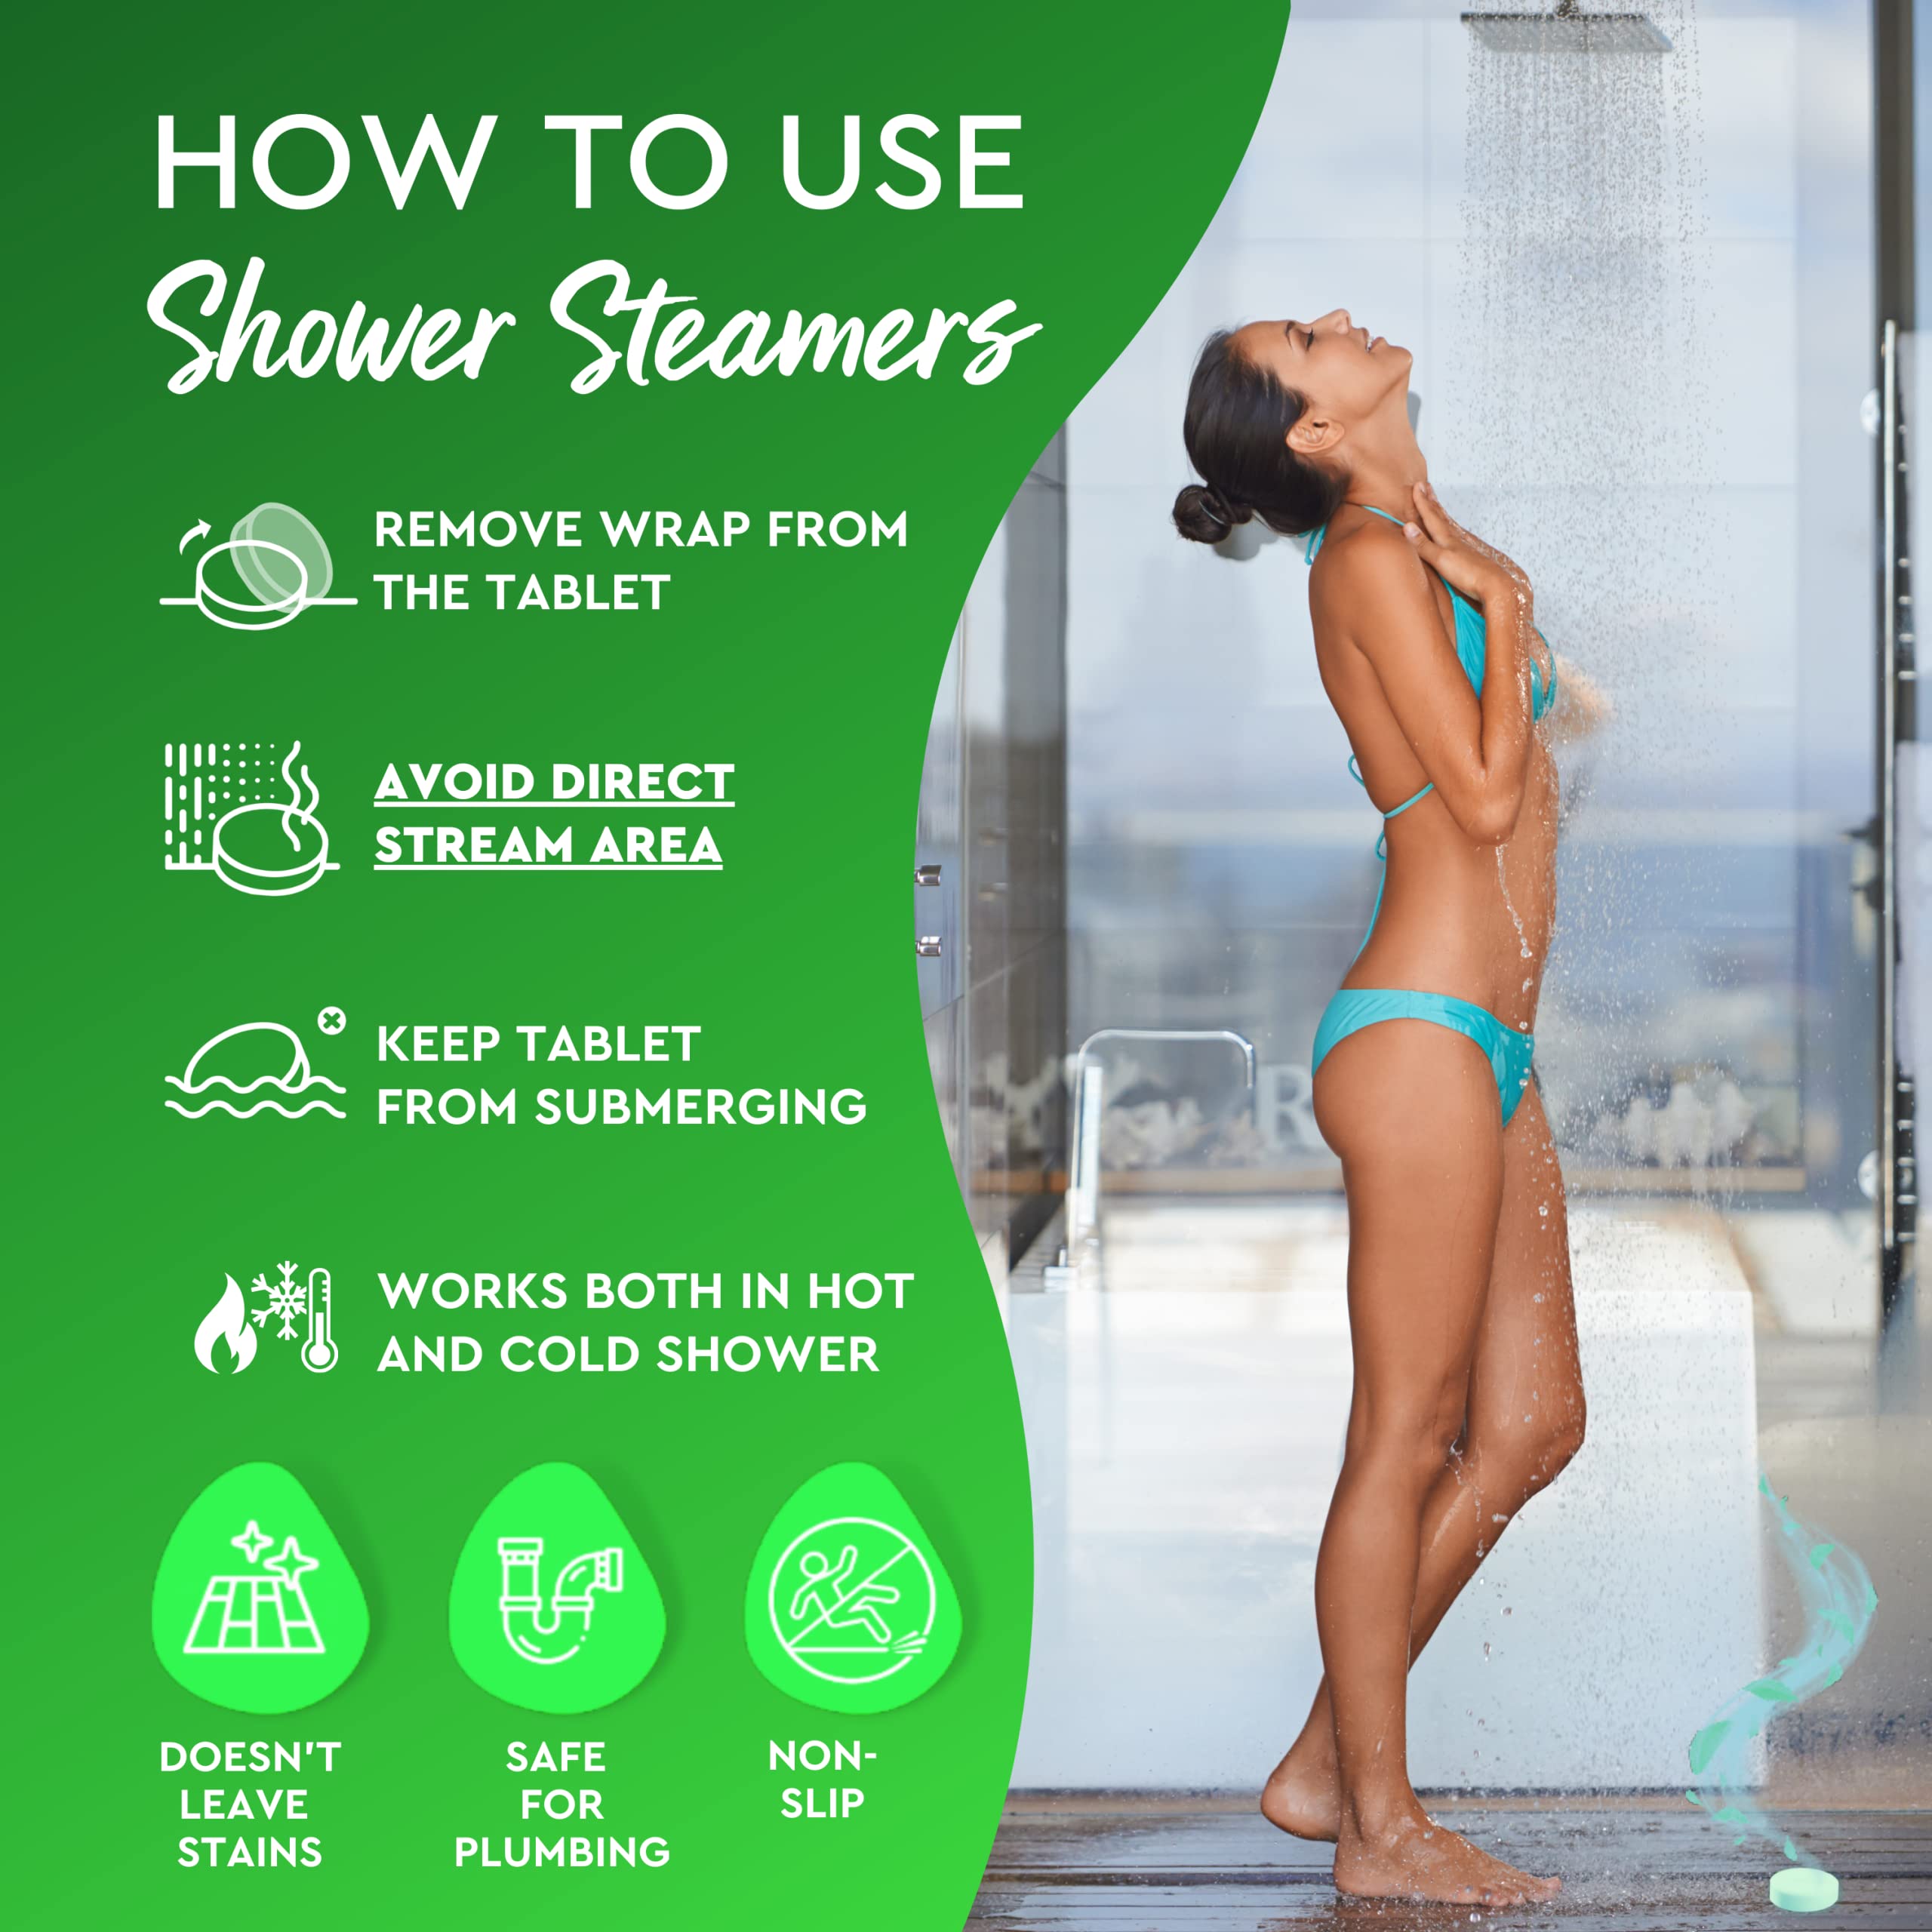 Cleverfy Shower Steamers Aromatherapy - Pack of 6 Menthol & Eucalyptus Shower Bombs with Essential Oils for Relaxation and Nasal Congestion. Green Set